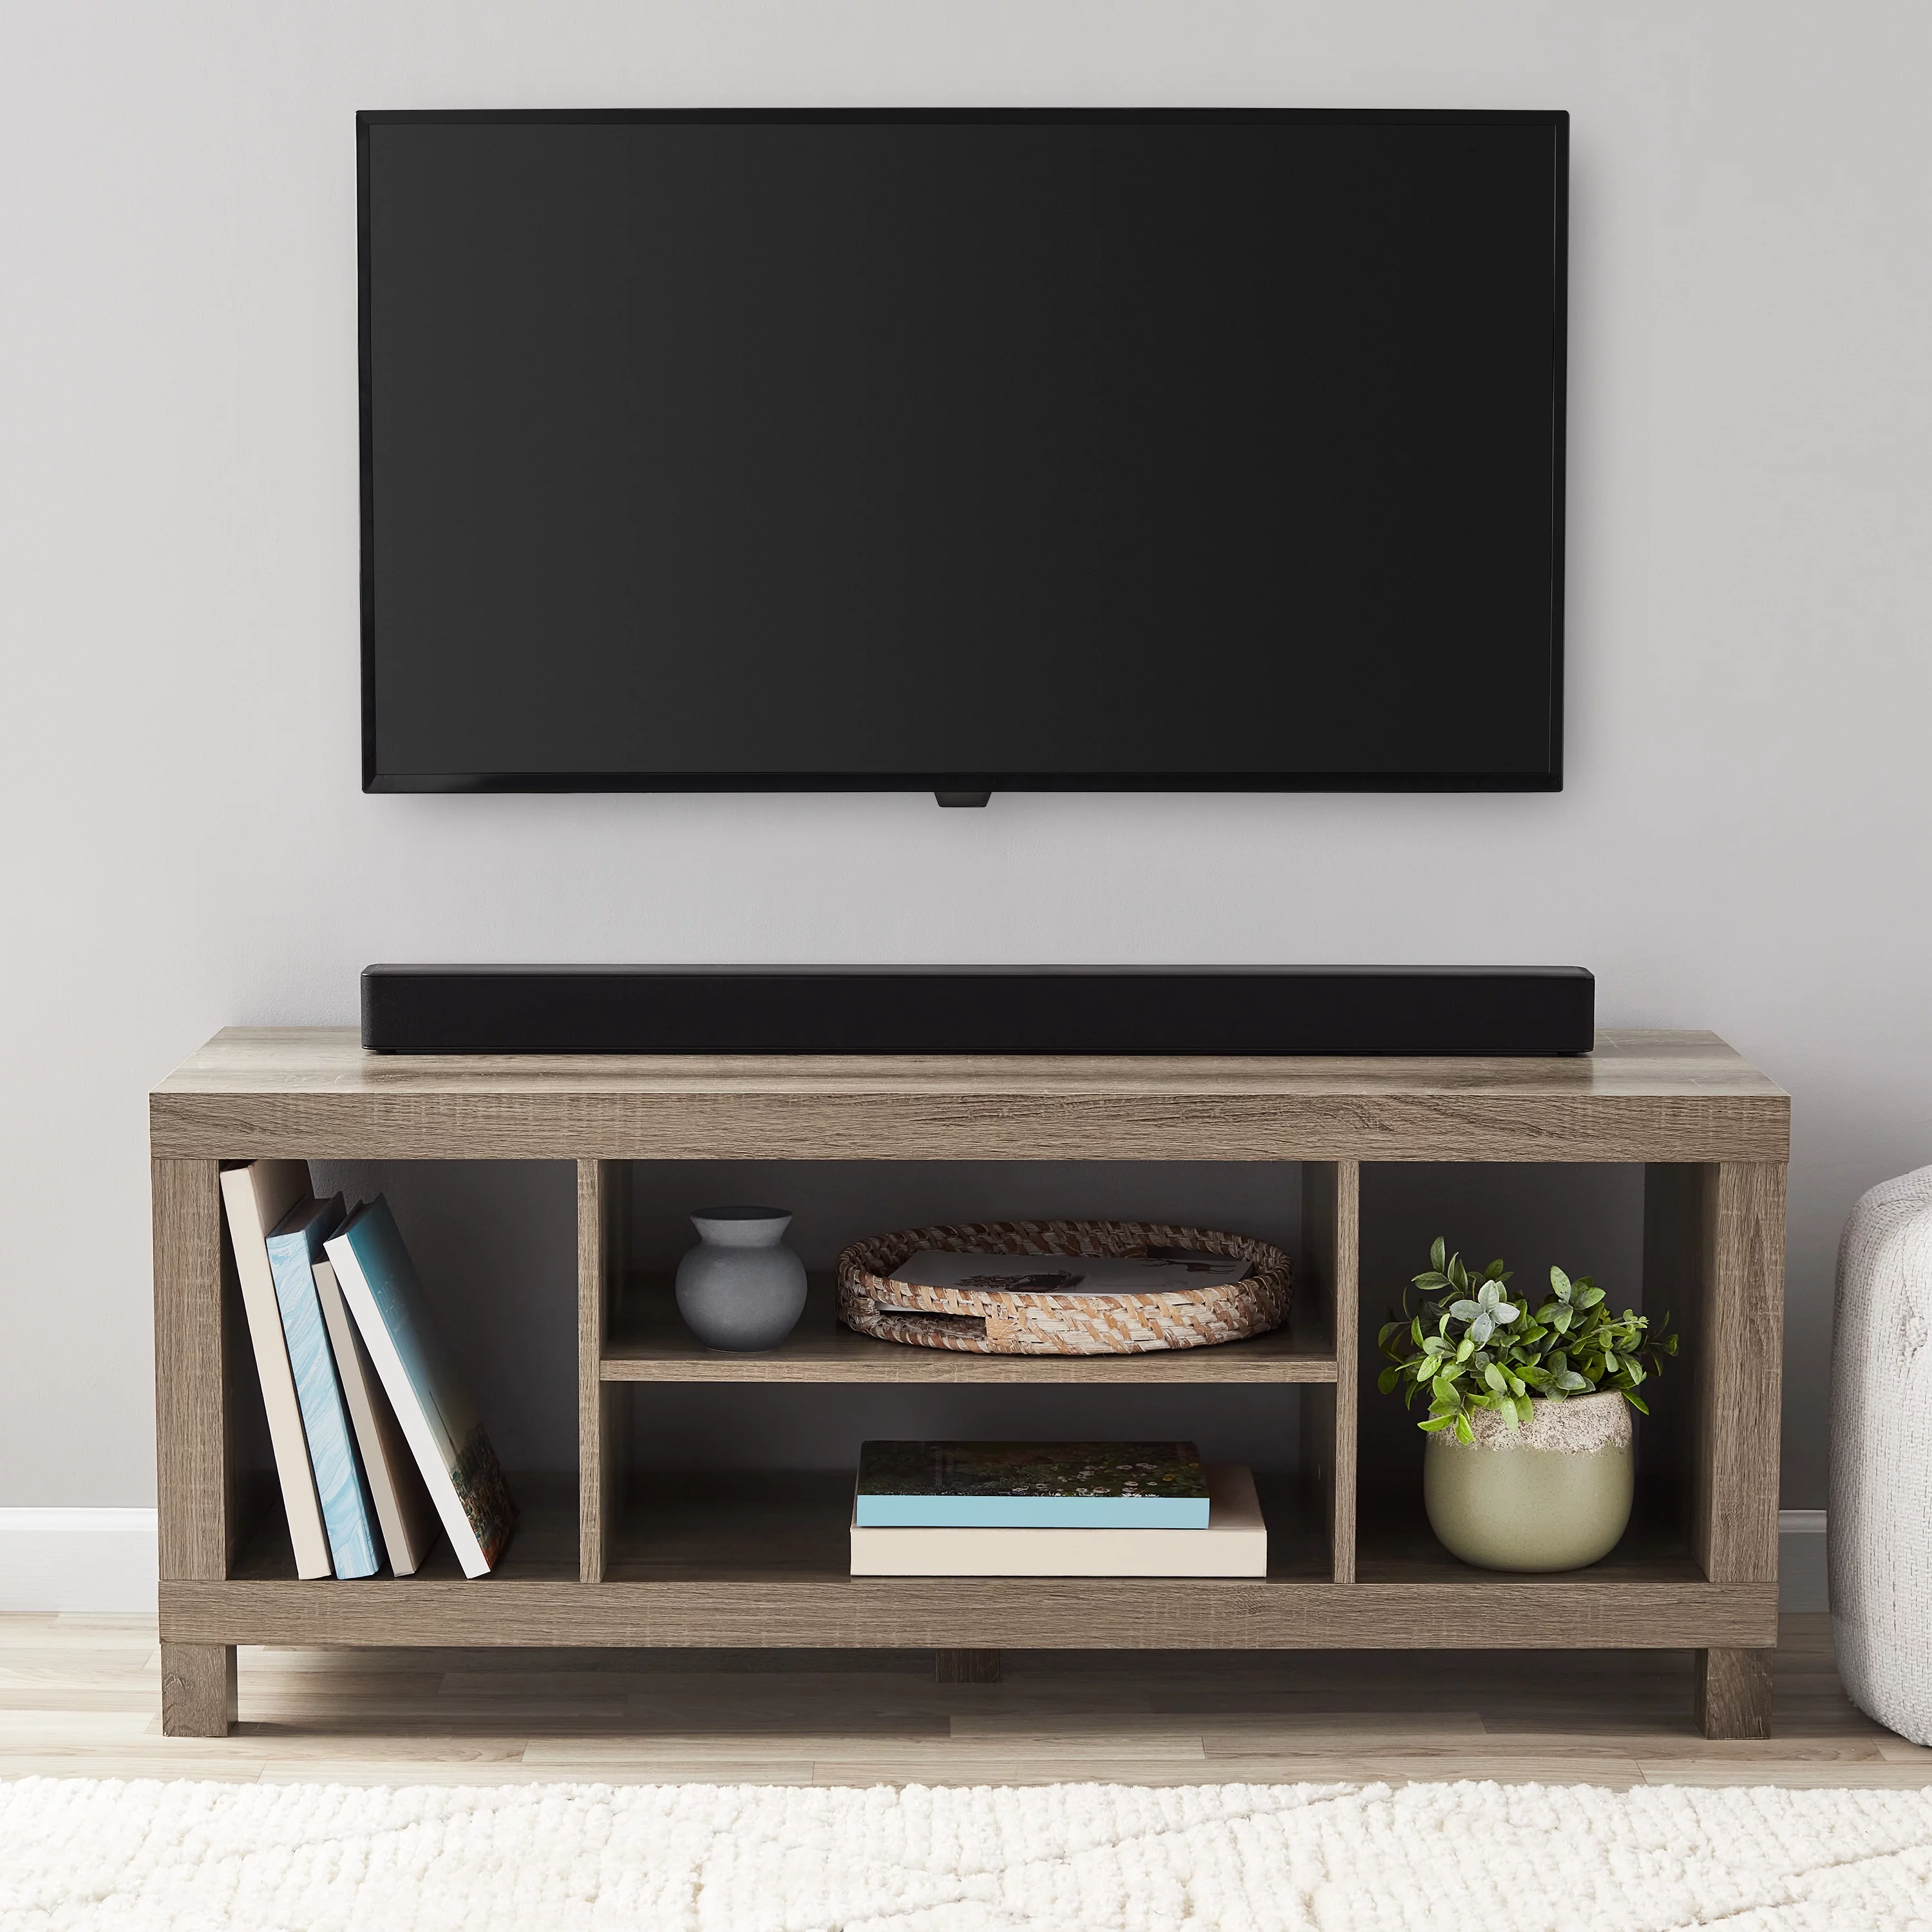 Mainstays TV Stand for TVs up to 42", Rustic Oak